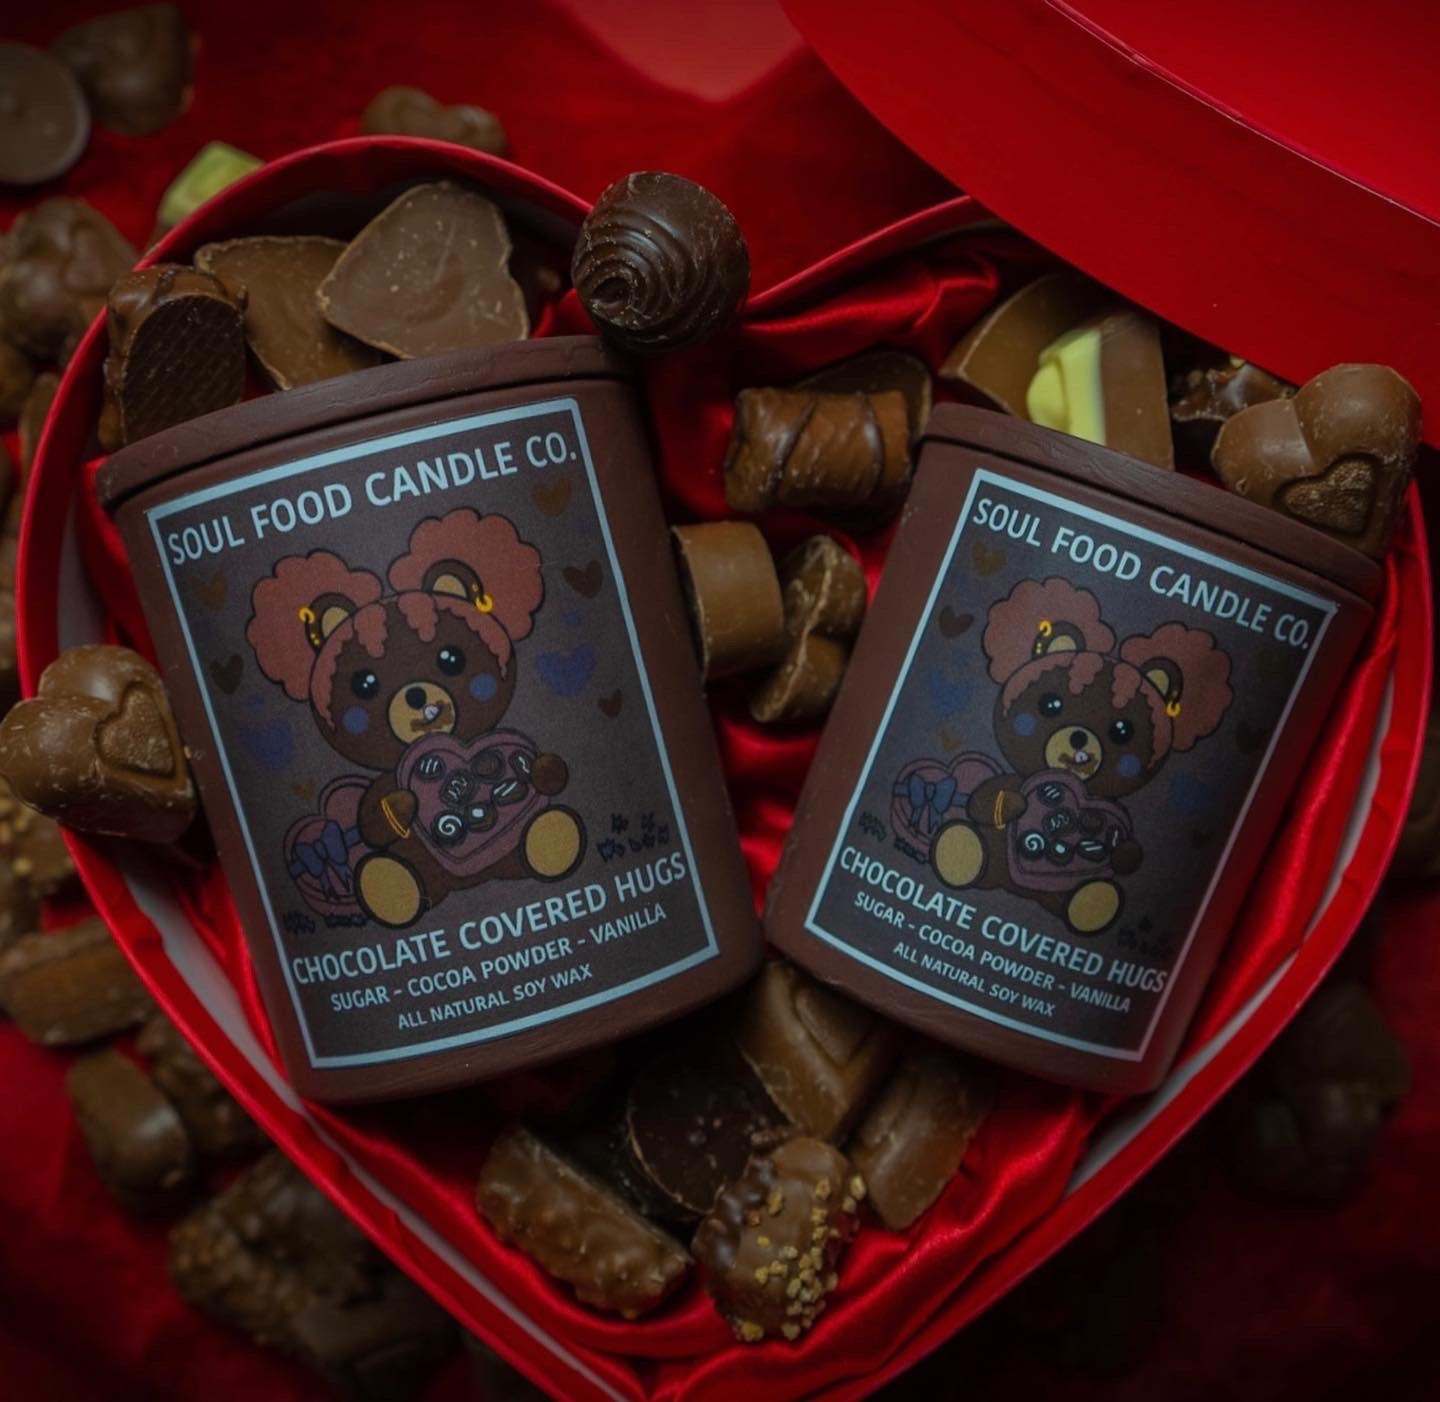 Chocolate Covered Hugs - Soul Food Candle Company